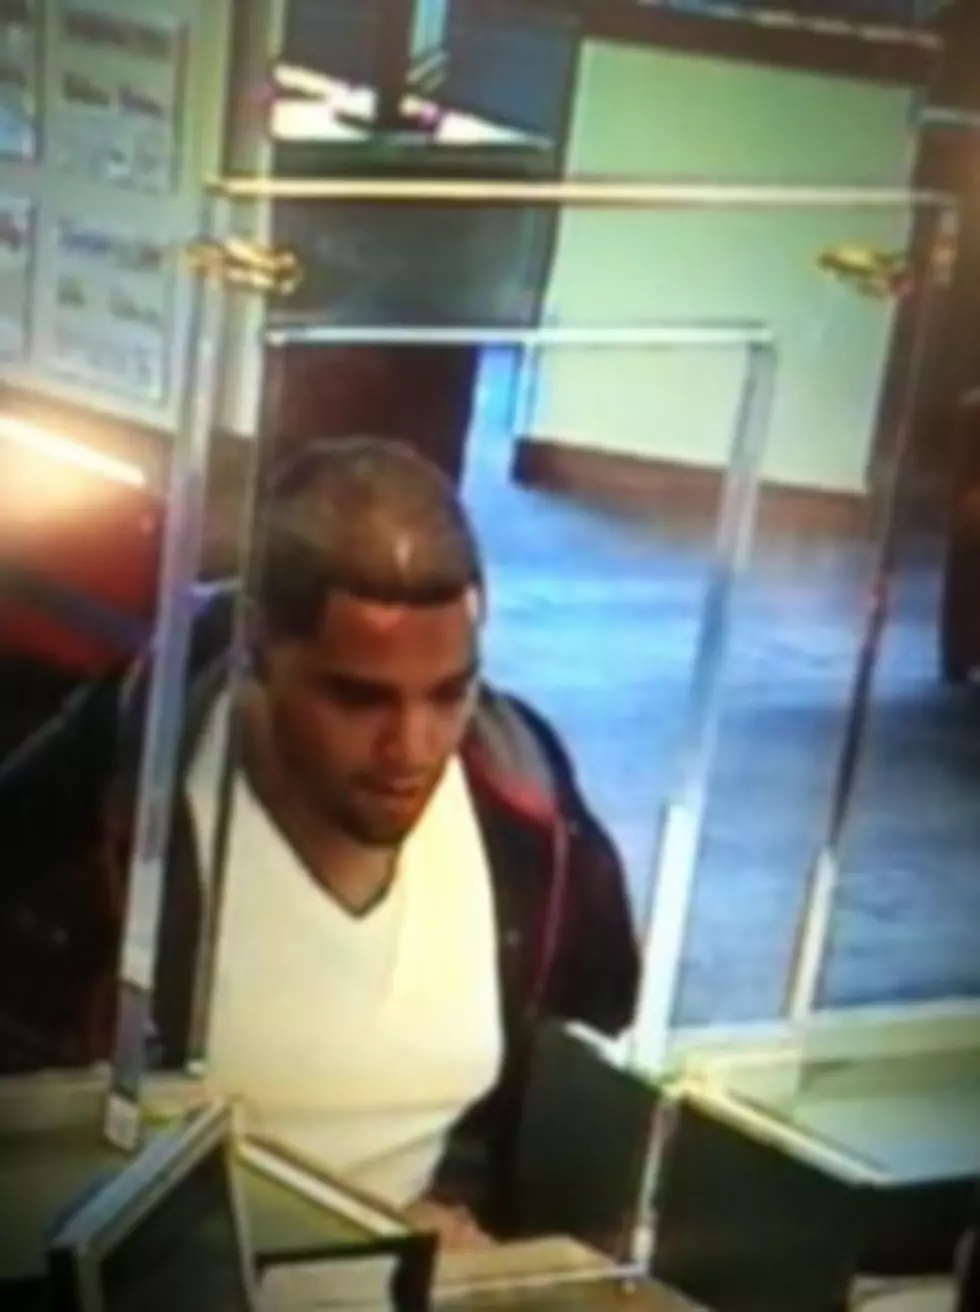 Man Robs Bank After Foiled Attempt